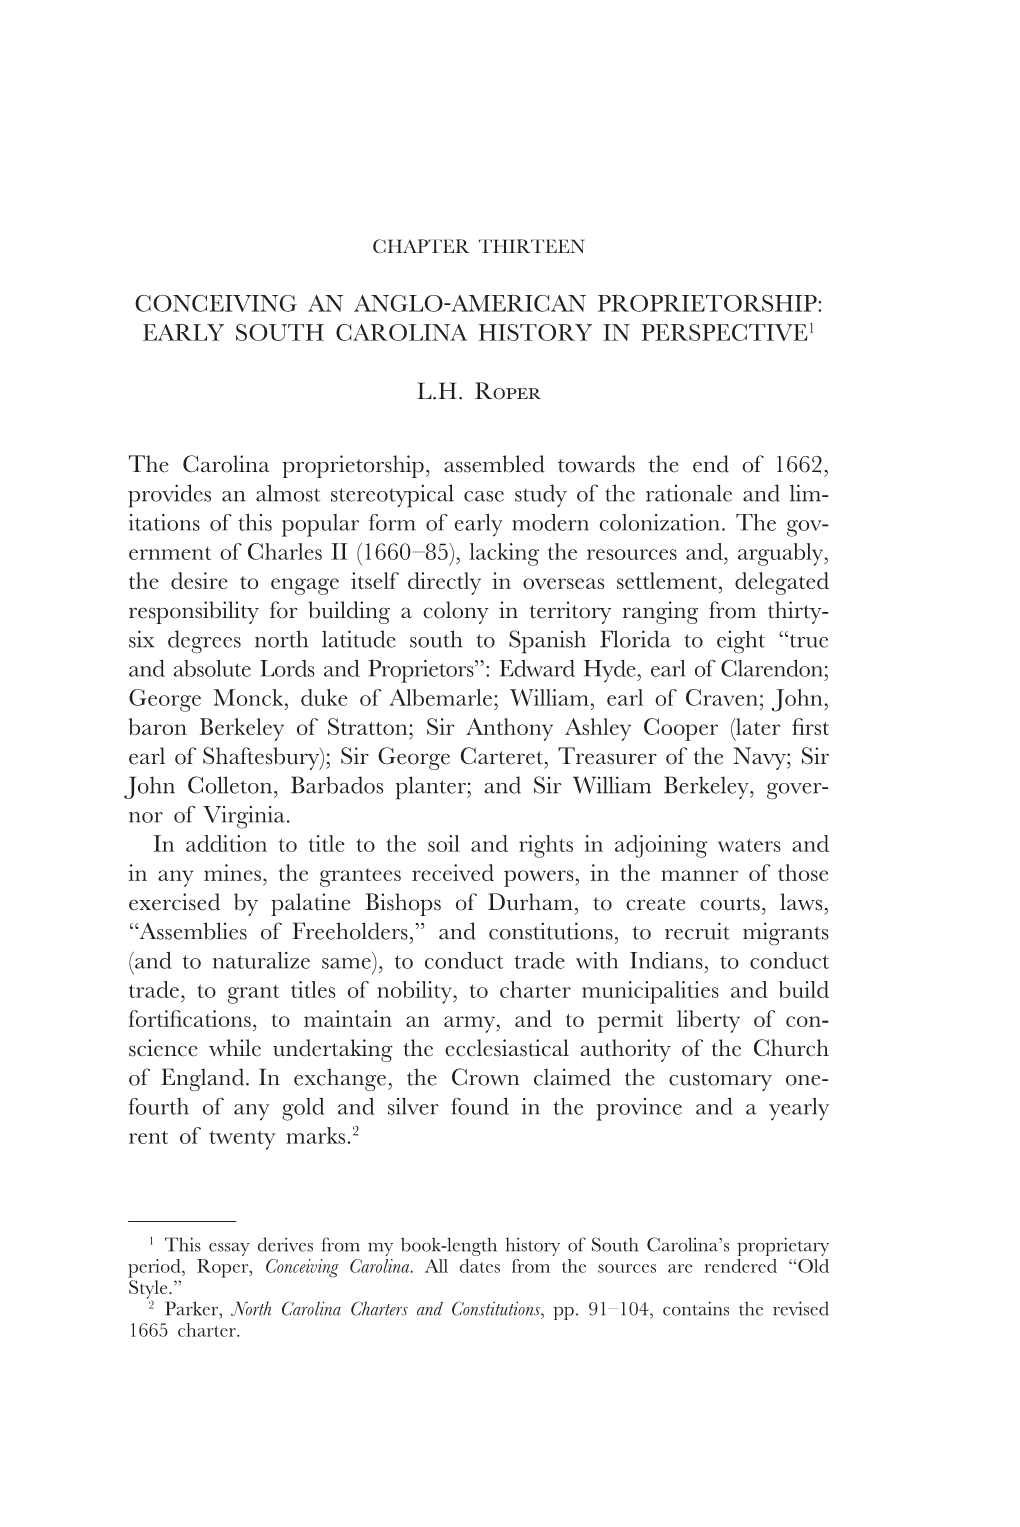 Conceiving an Anglo-American Proprietorship: Early South Carolina History in Perspective1